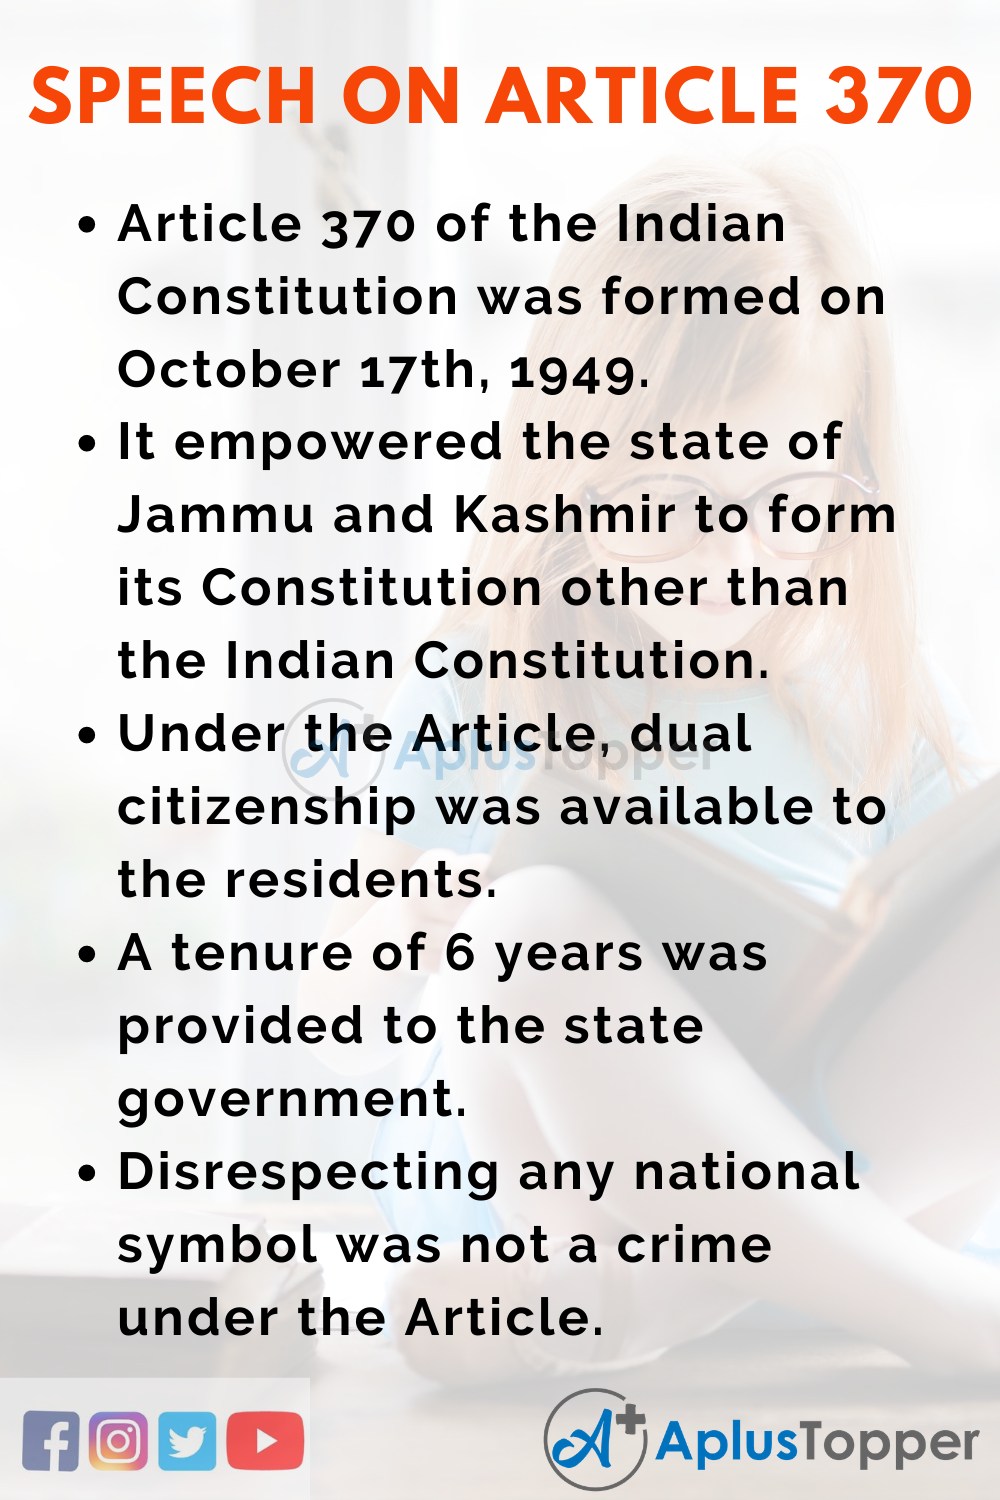 article 370 speech in english